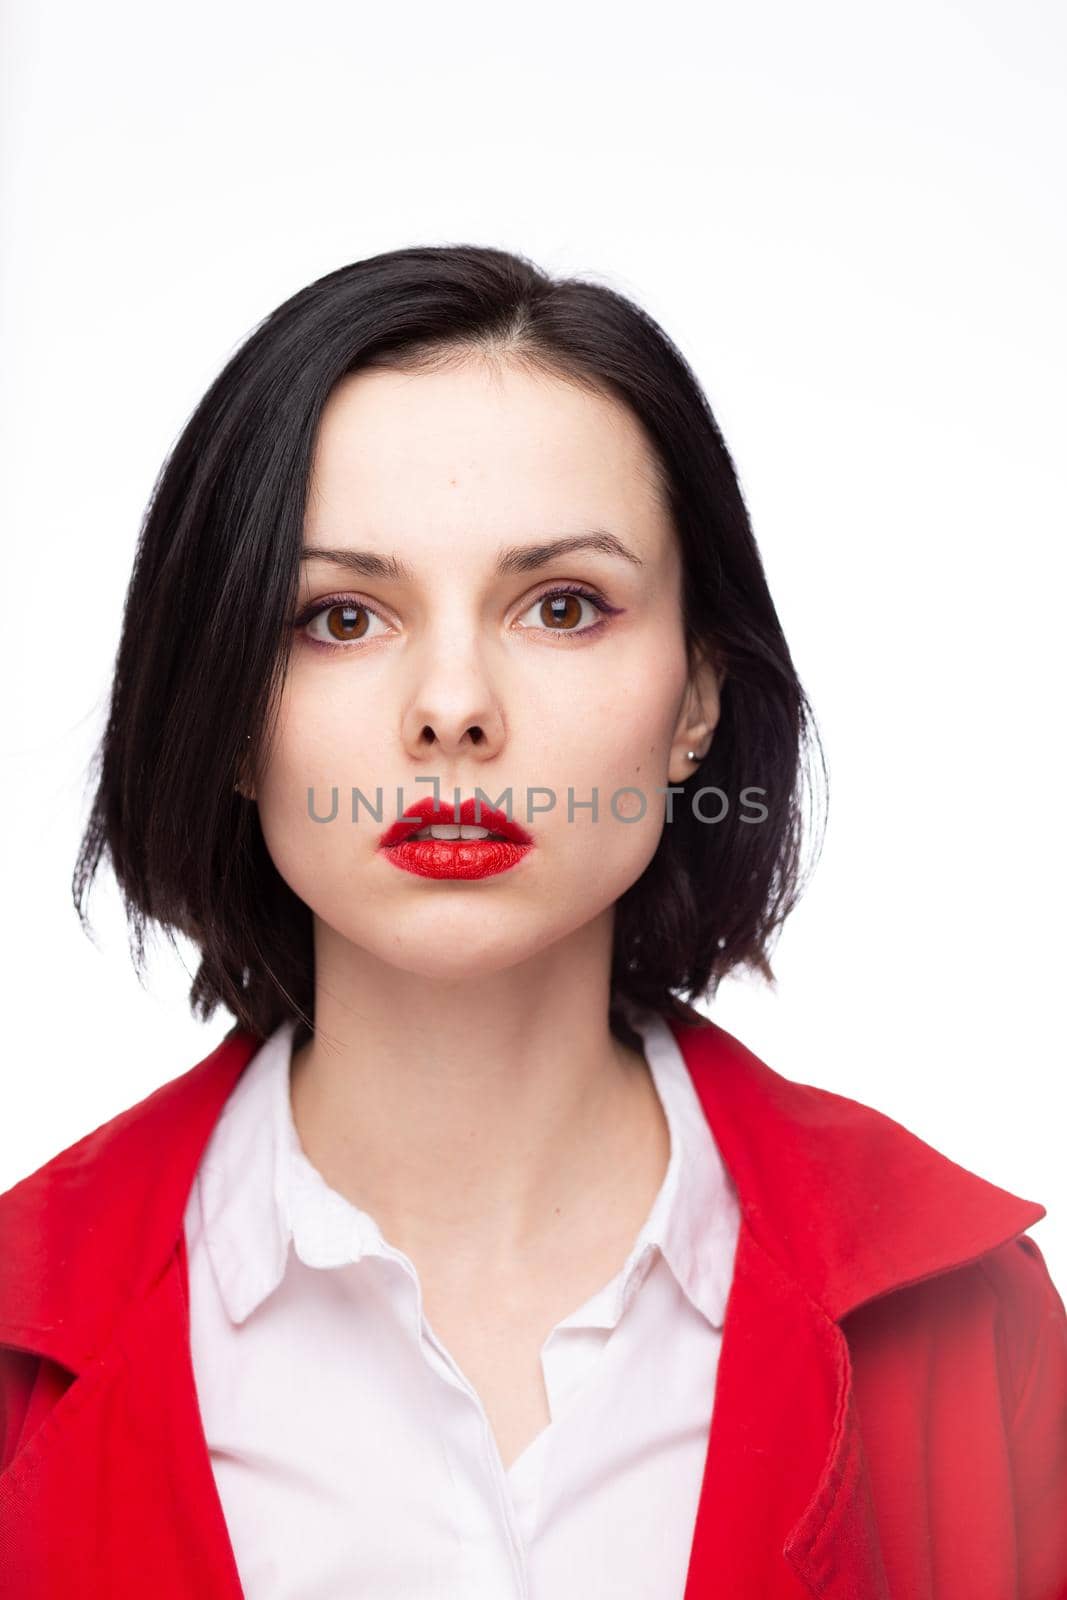 brunette woman with red lipstick on her lips in a red jacket and white shirt, white background by shilovskaya